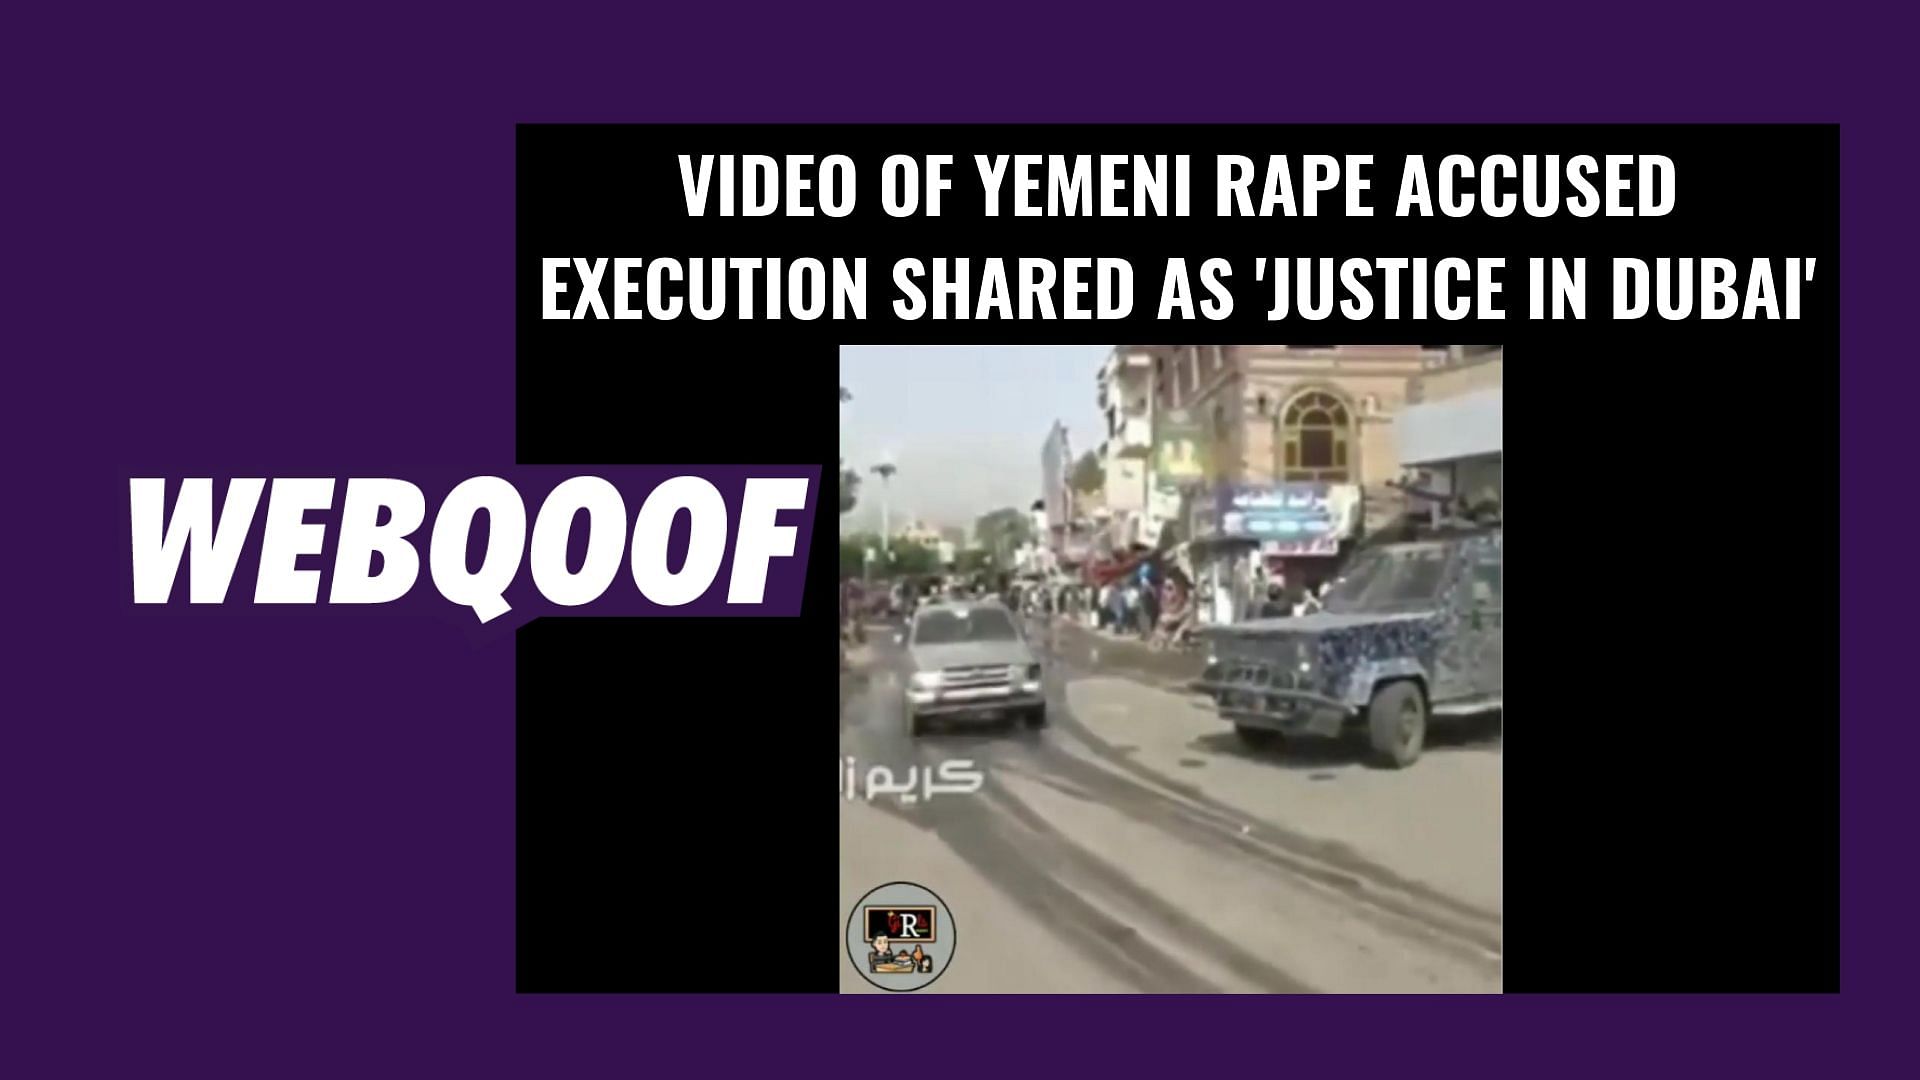 The video is neither from Dubai, and nor was the execution done “15 minutes” after the rape occurred.